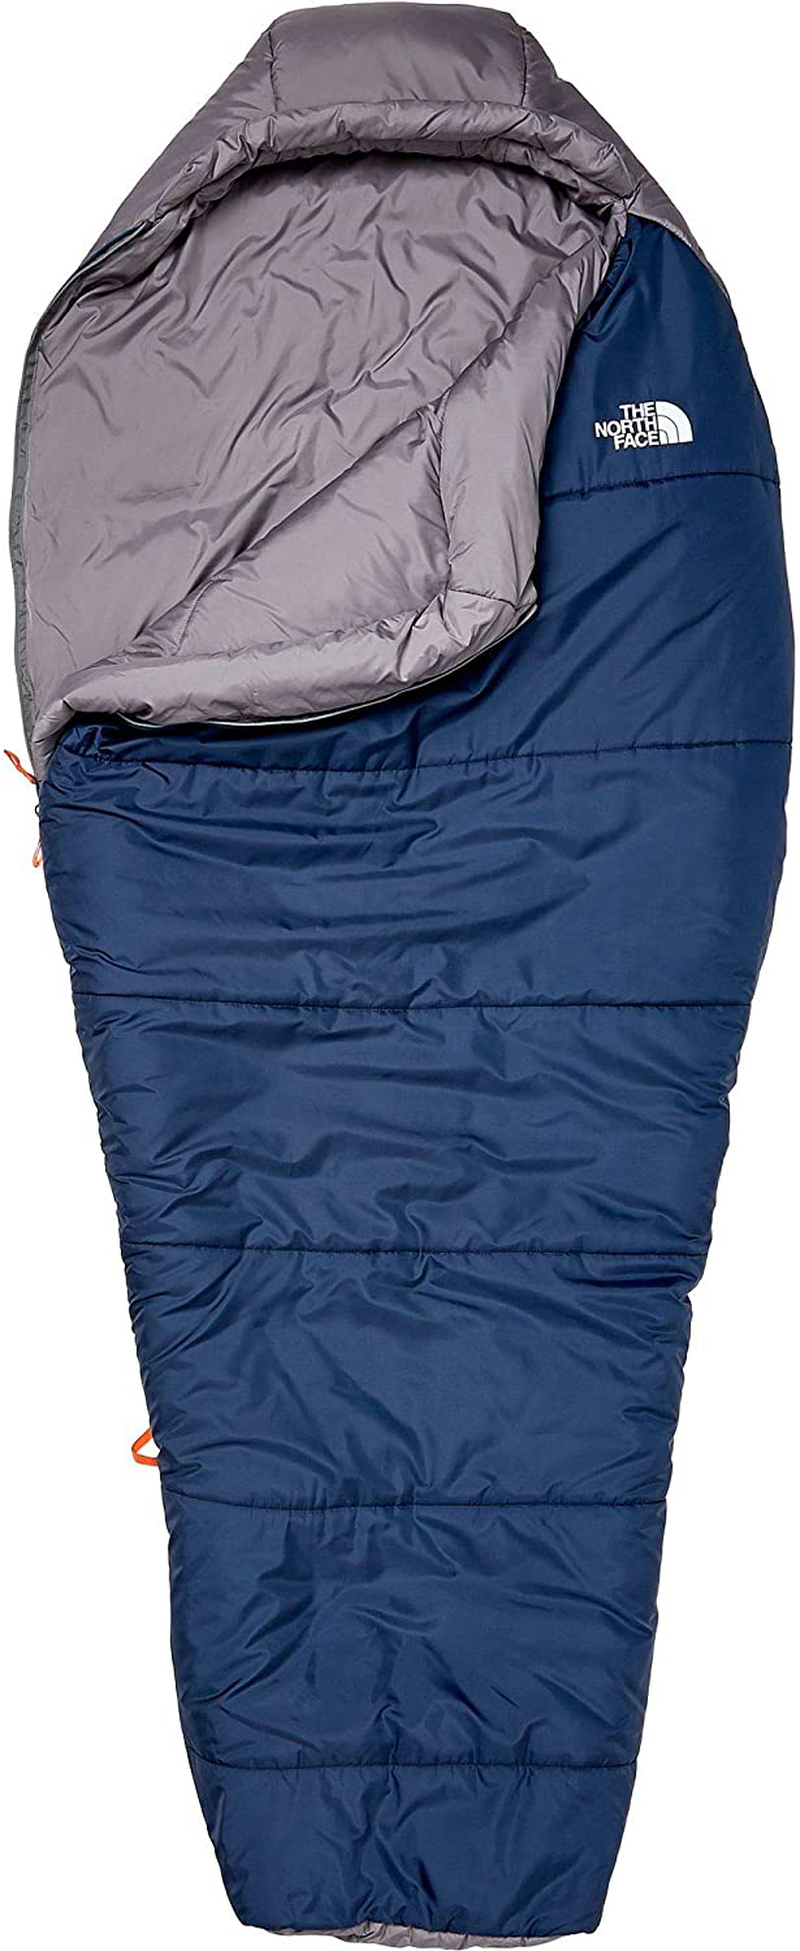 The North Face Youth Wasatch 20 Sleeping Bags Camp Bedding Regular Right Hand